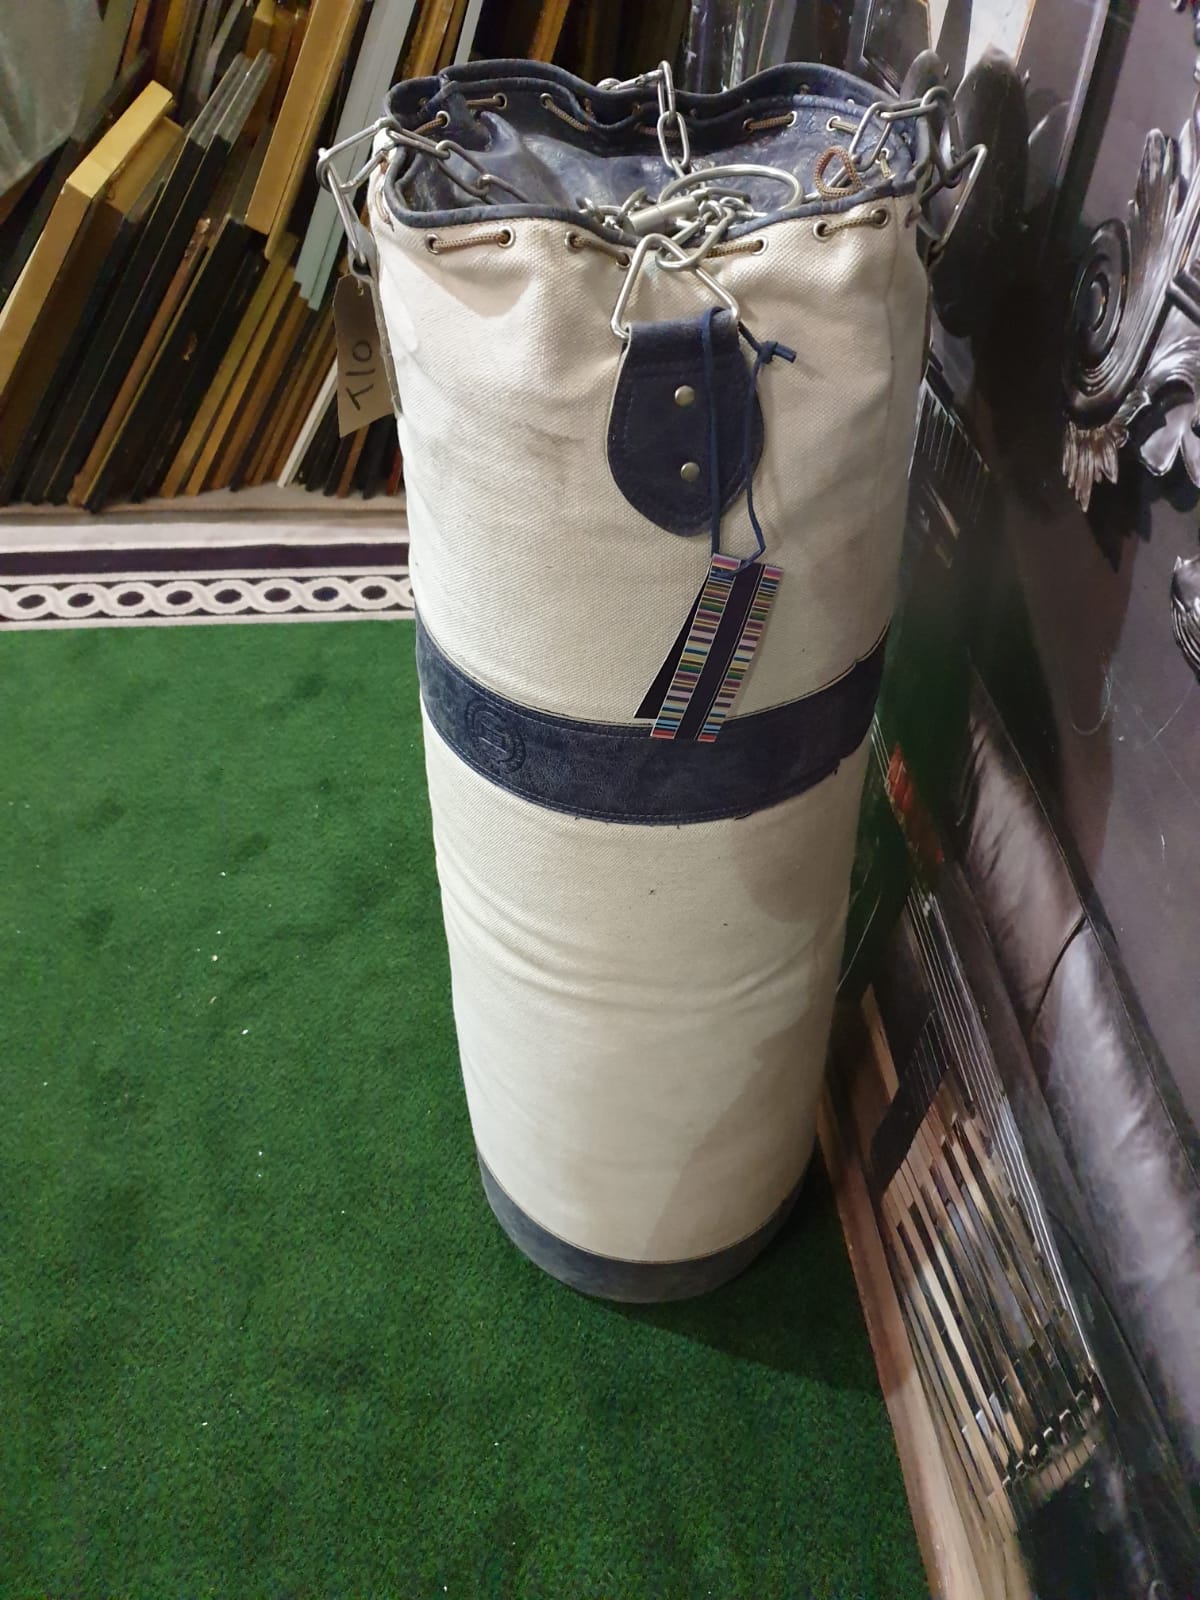 Timothy Oulton Boxing Punch Bag Add some style to your gym or training area or even as a